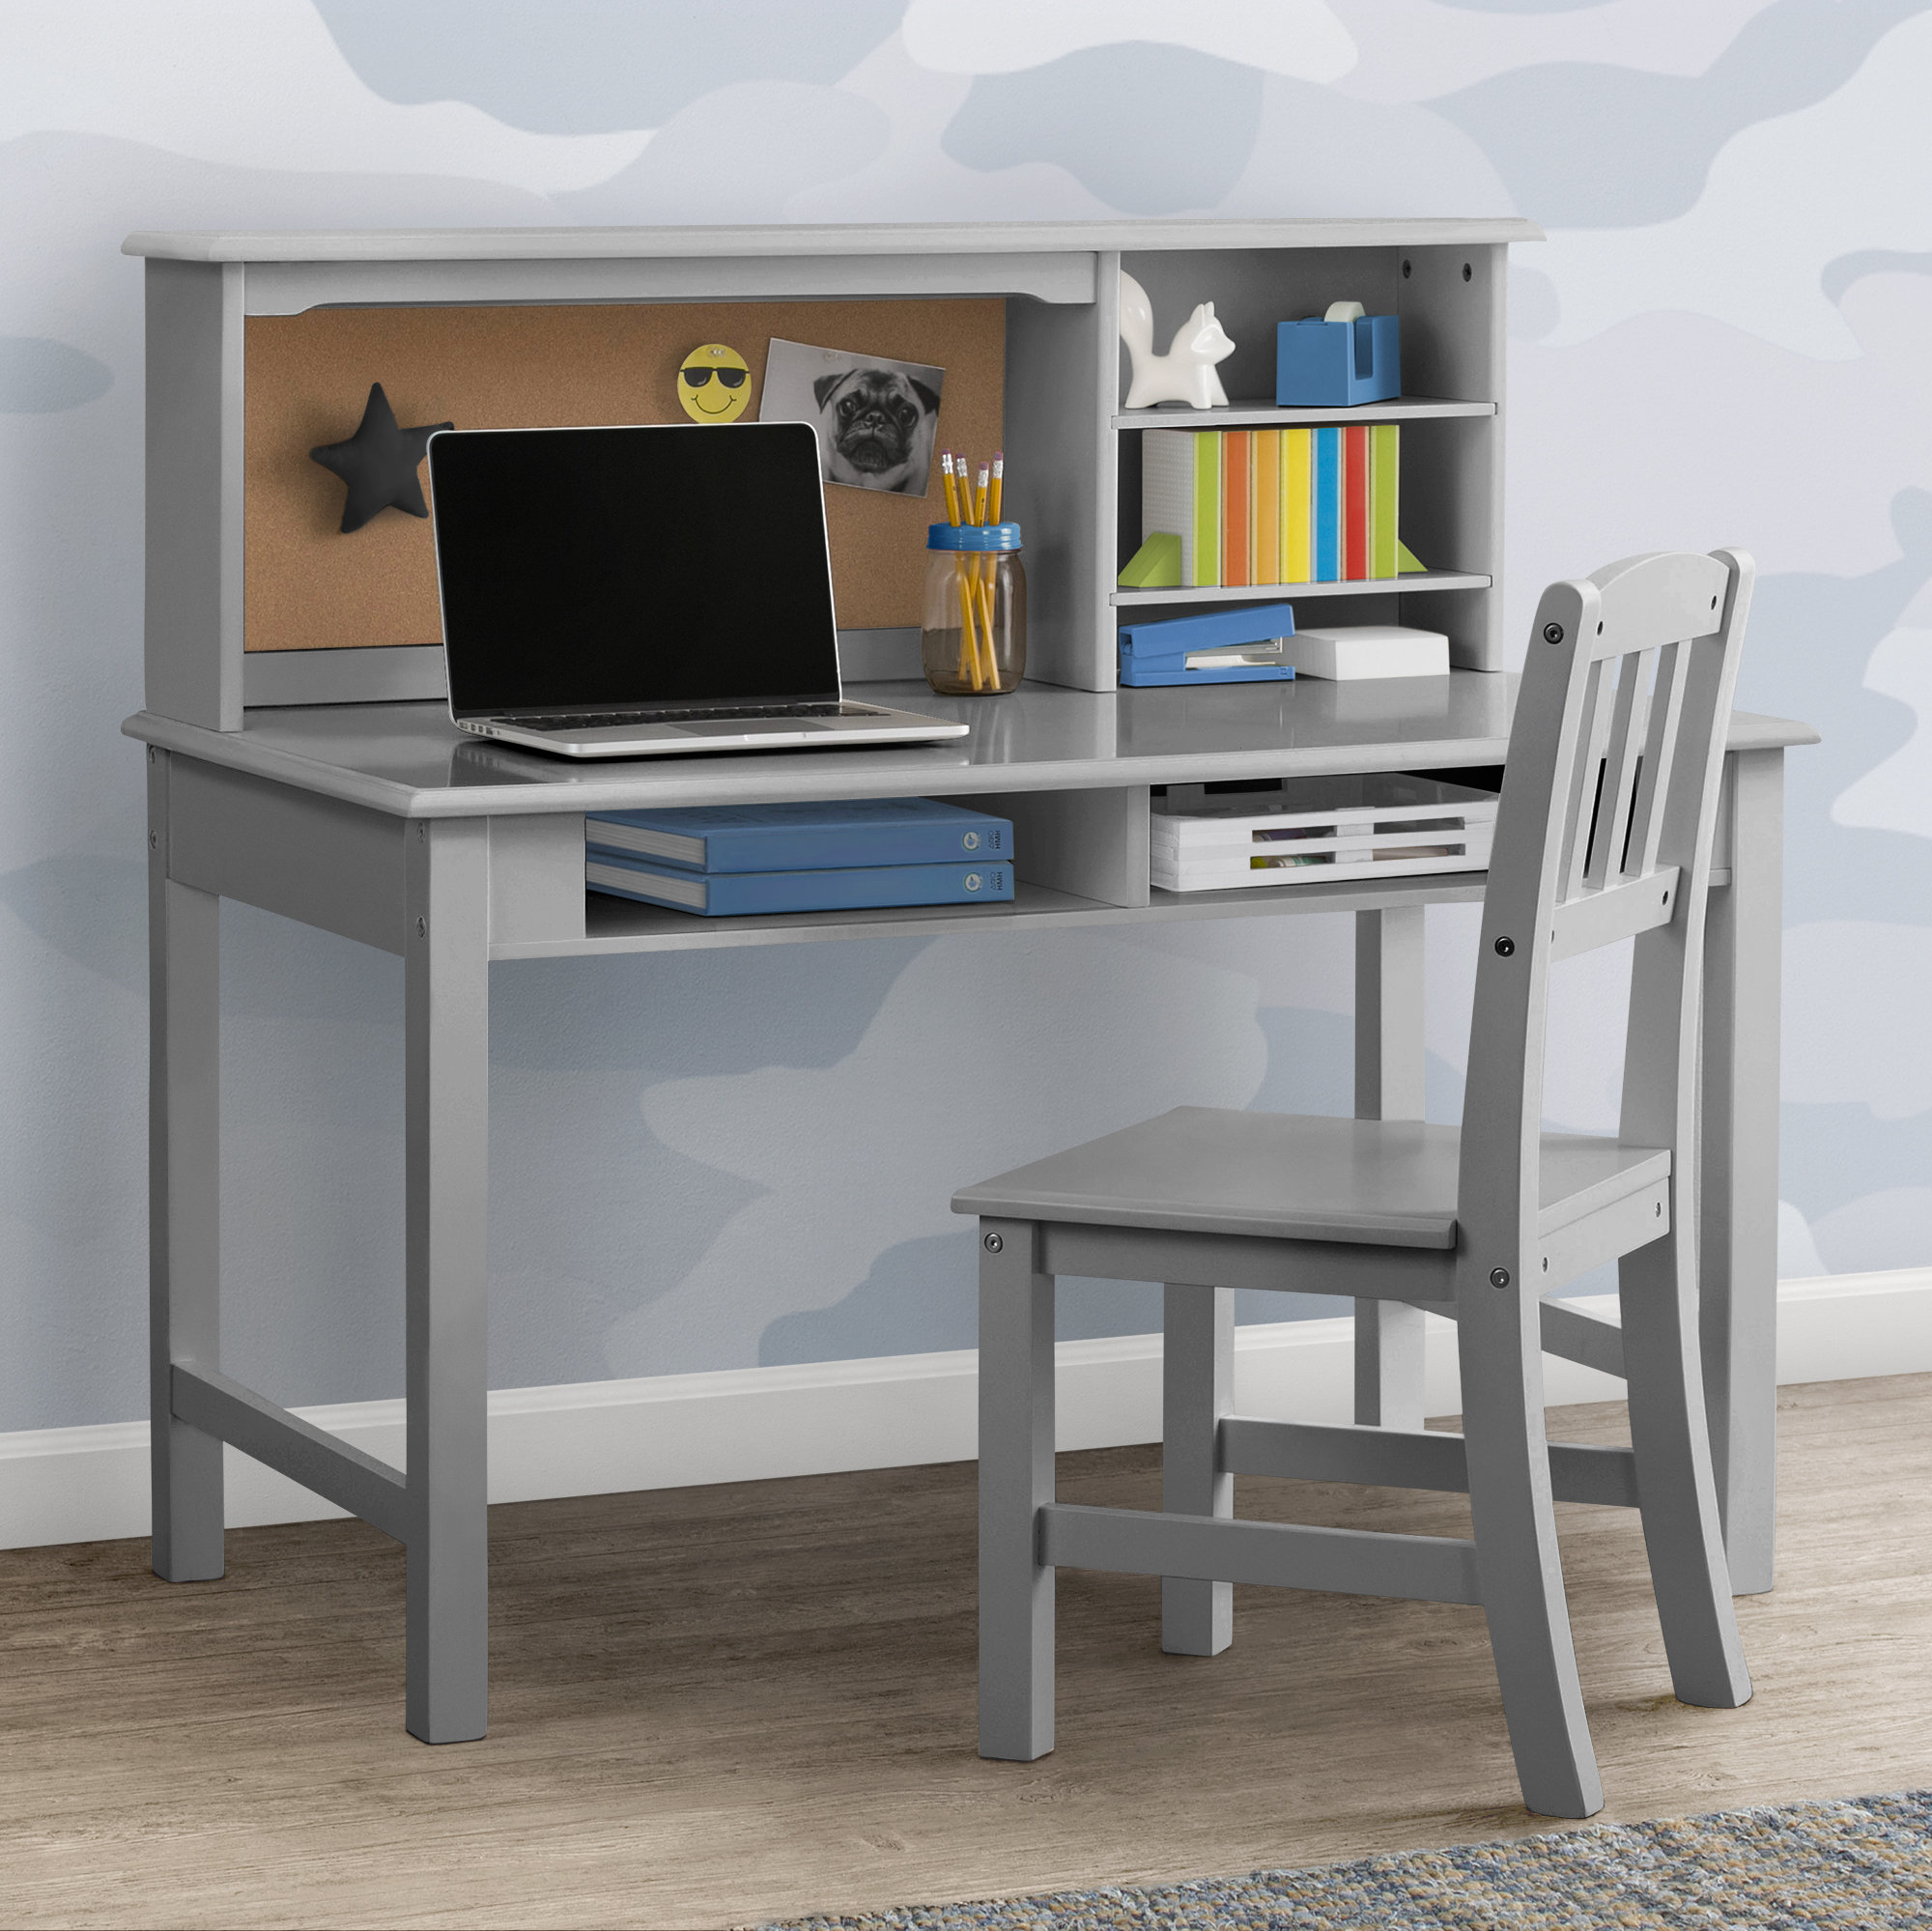 Kids Wooden Study Desk & Chair Writing Table w/Drawer Storage Cabinet